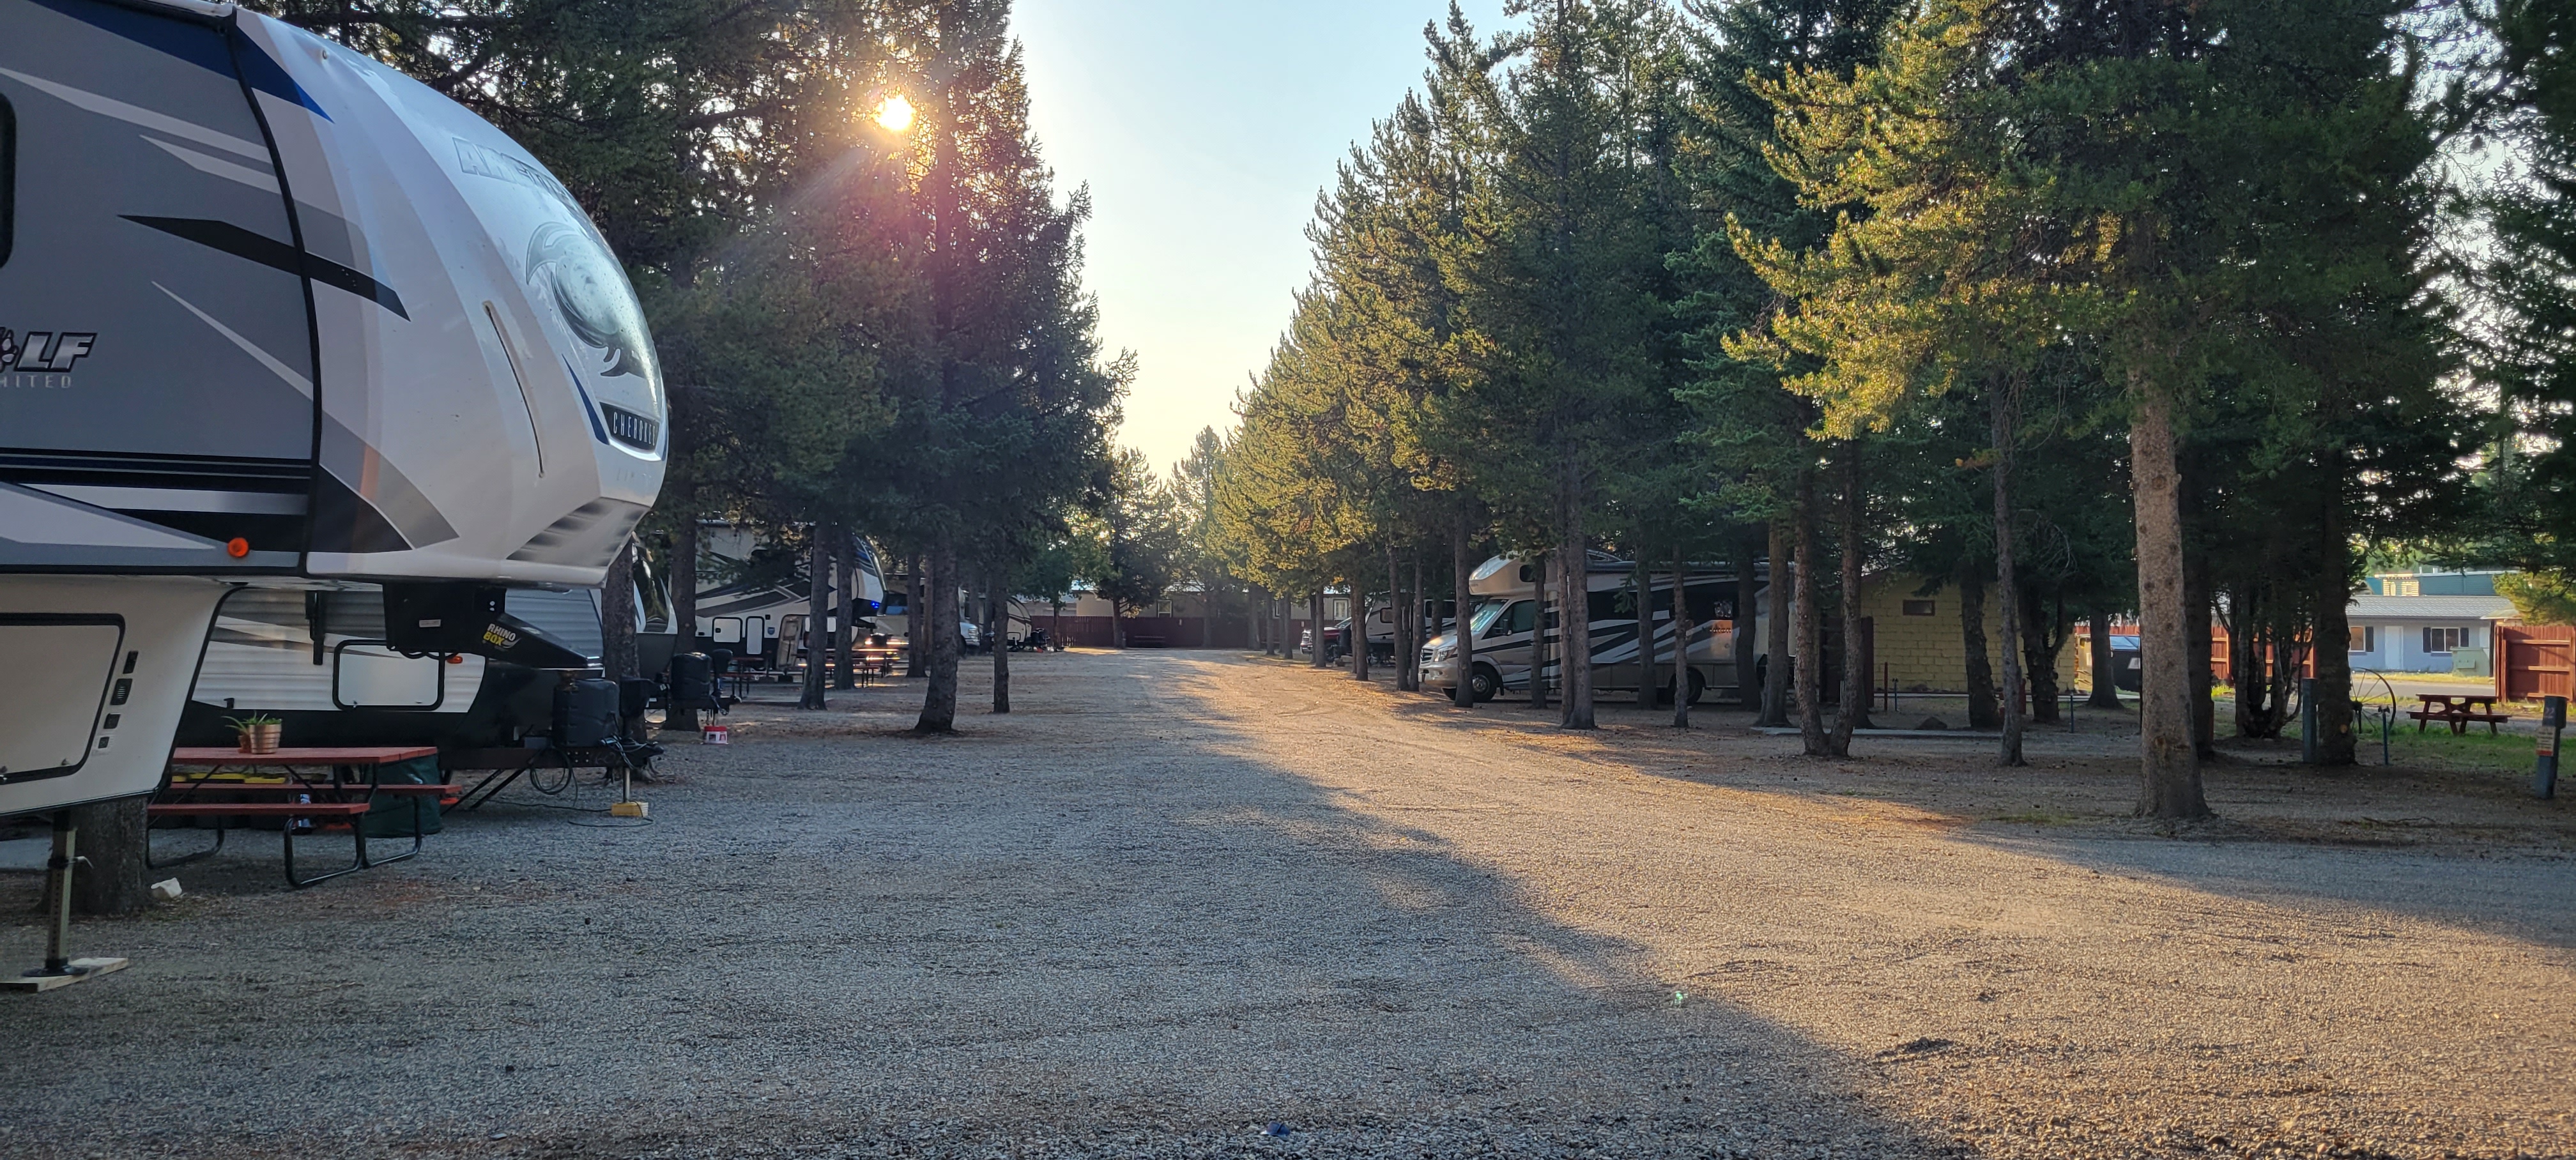 RVs parked in a row in the shadows of tall fir trees during sunrise.